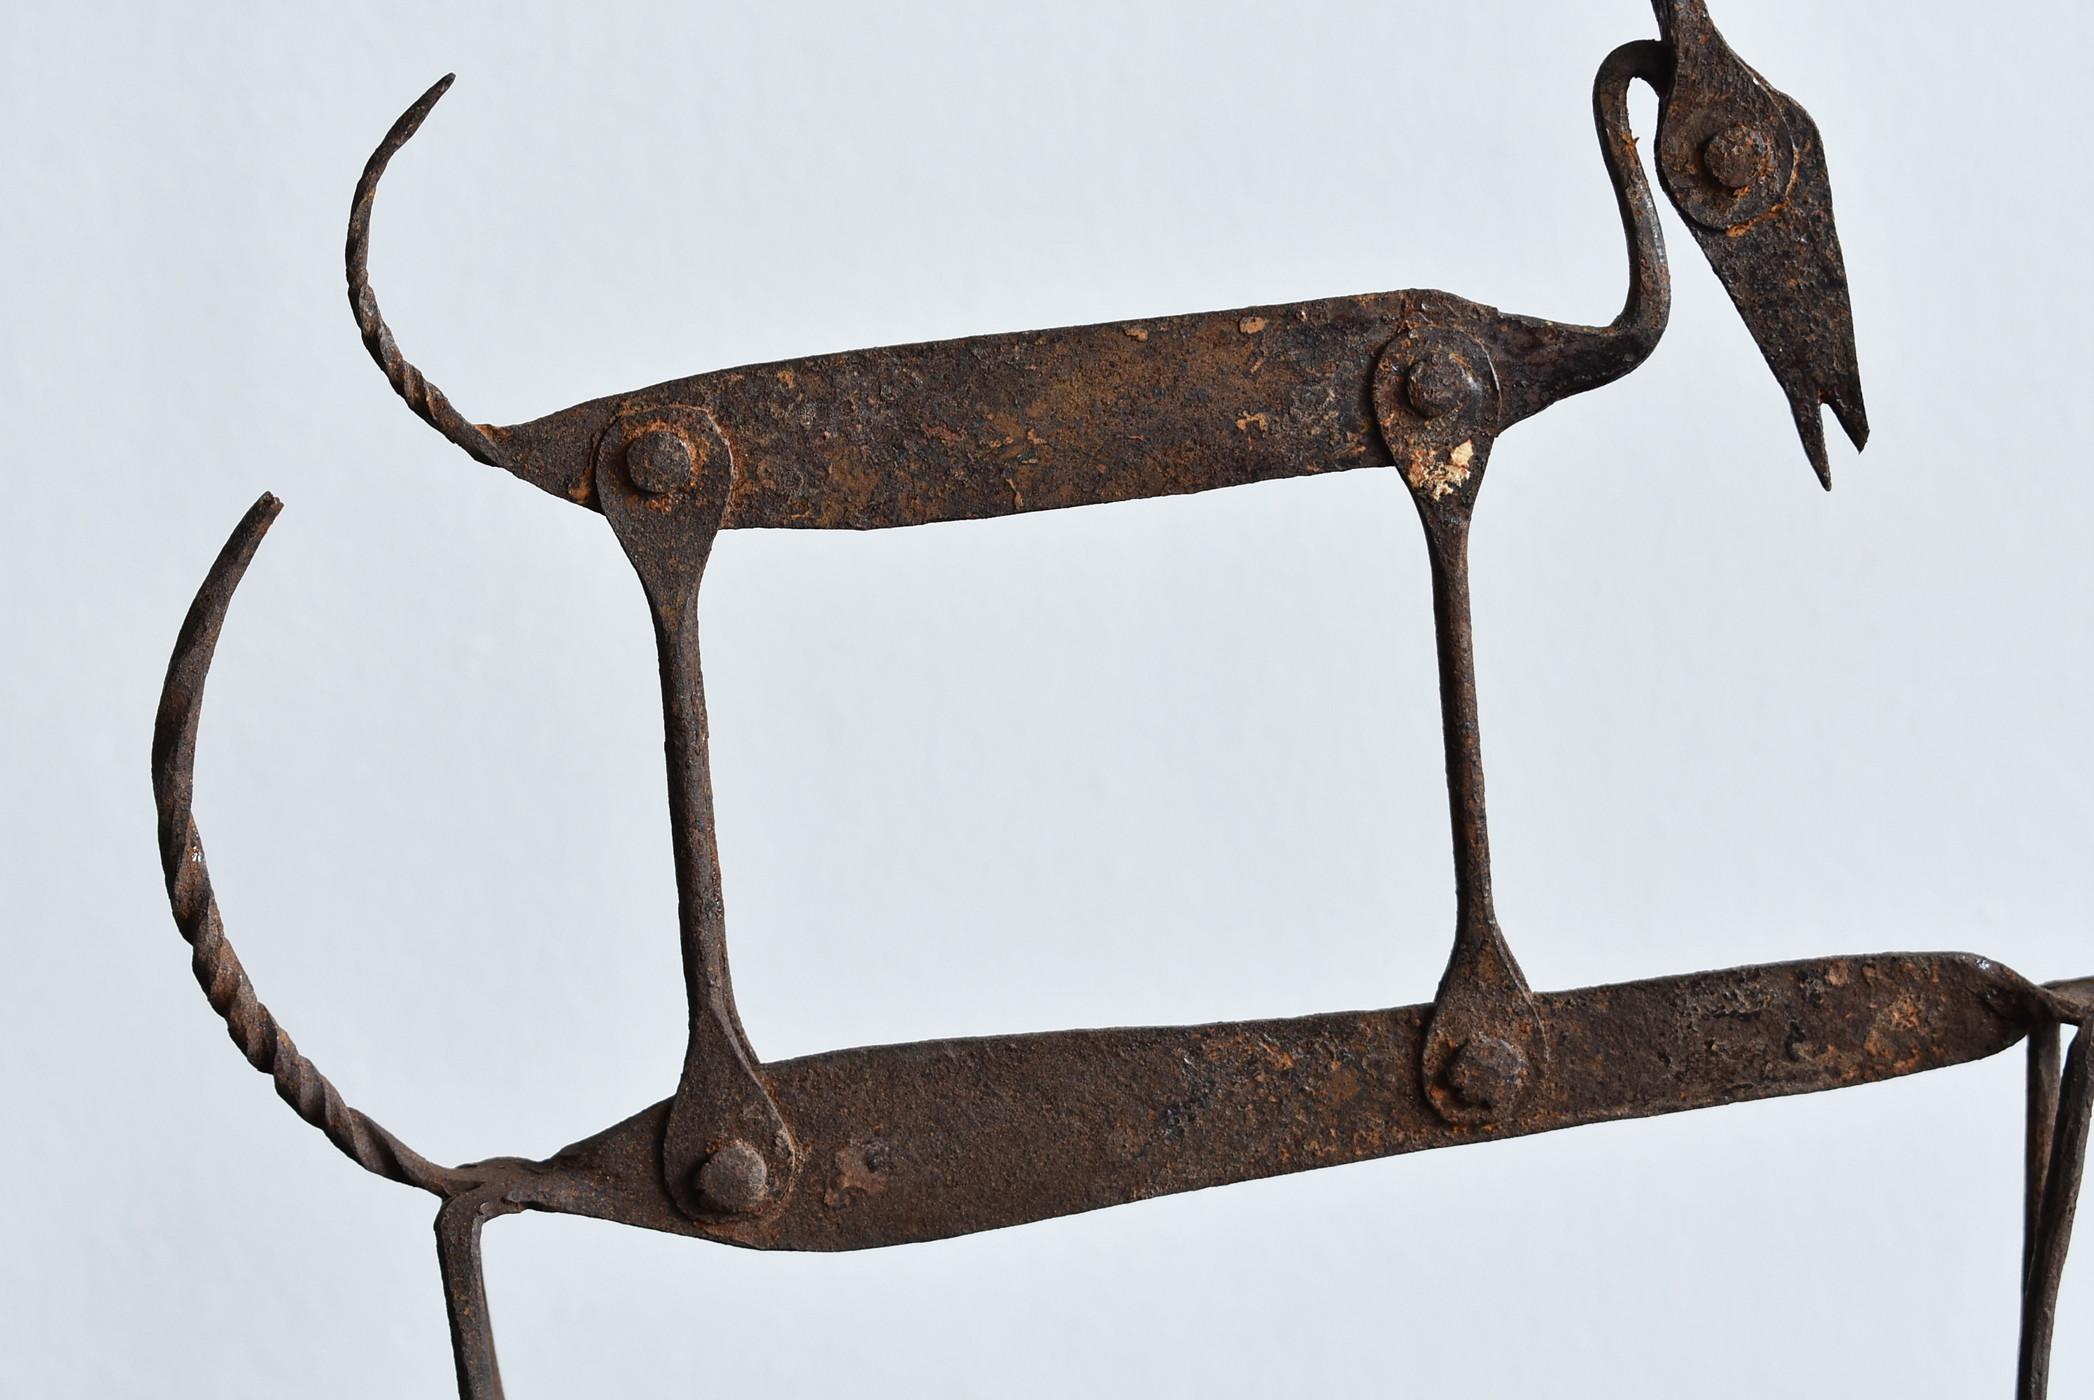 Burkinabe 20th Century-African, Iron Object Made by the Lobi Tribe of Burkina Faso, Africa